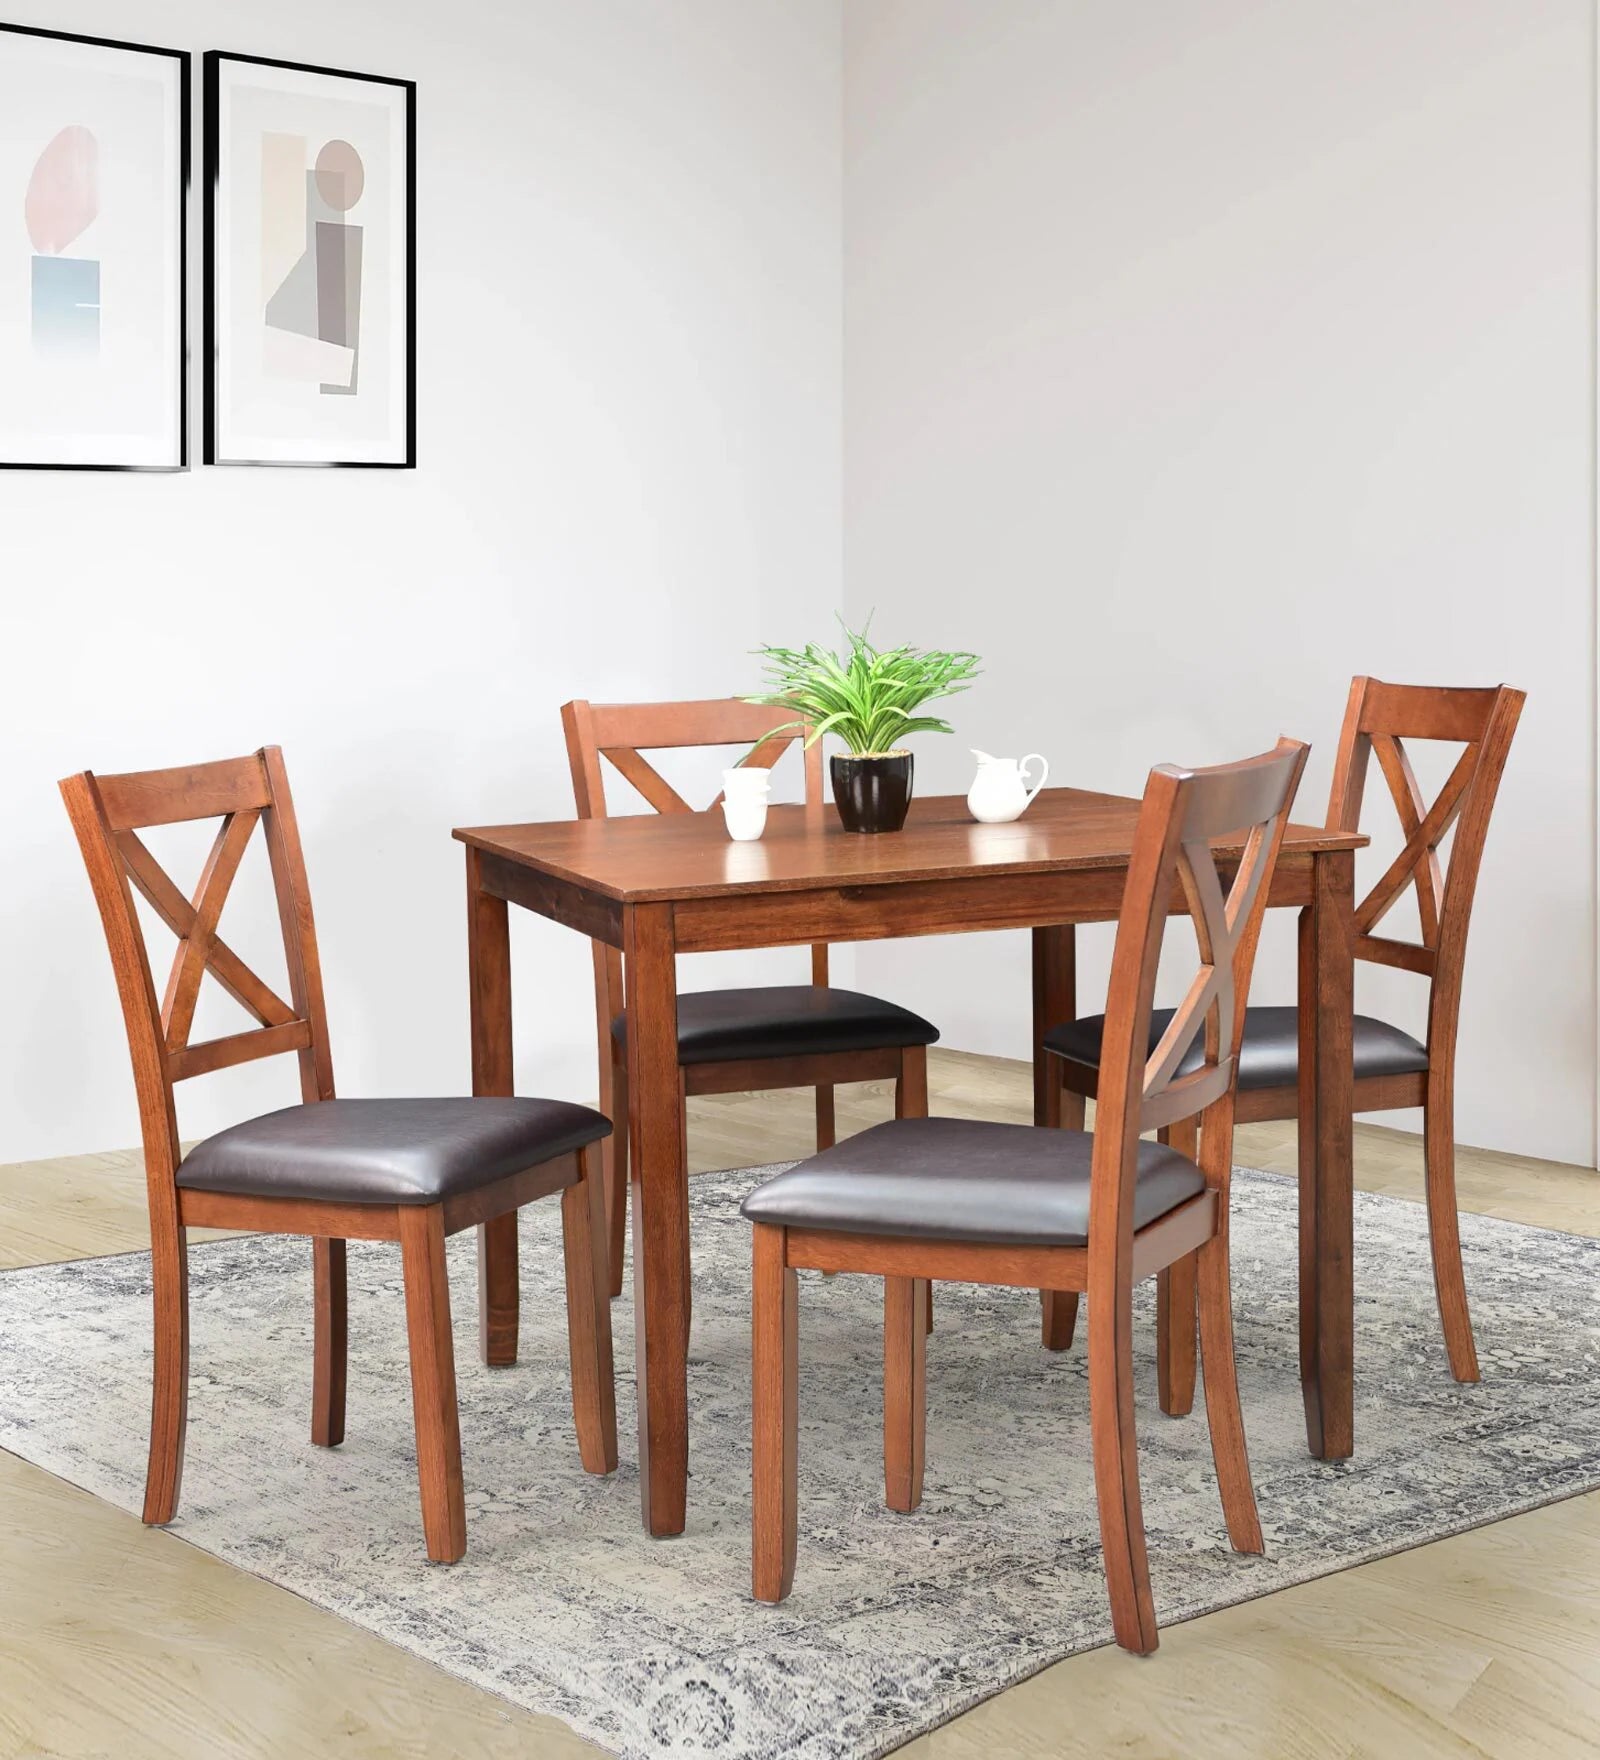 Solid Wood 4 Seater Dining Set In Brown Colour